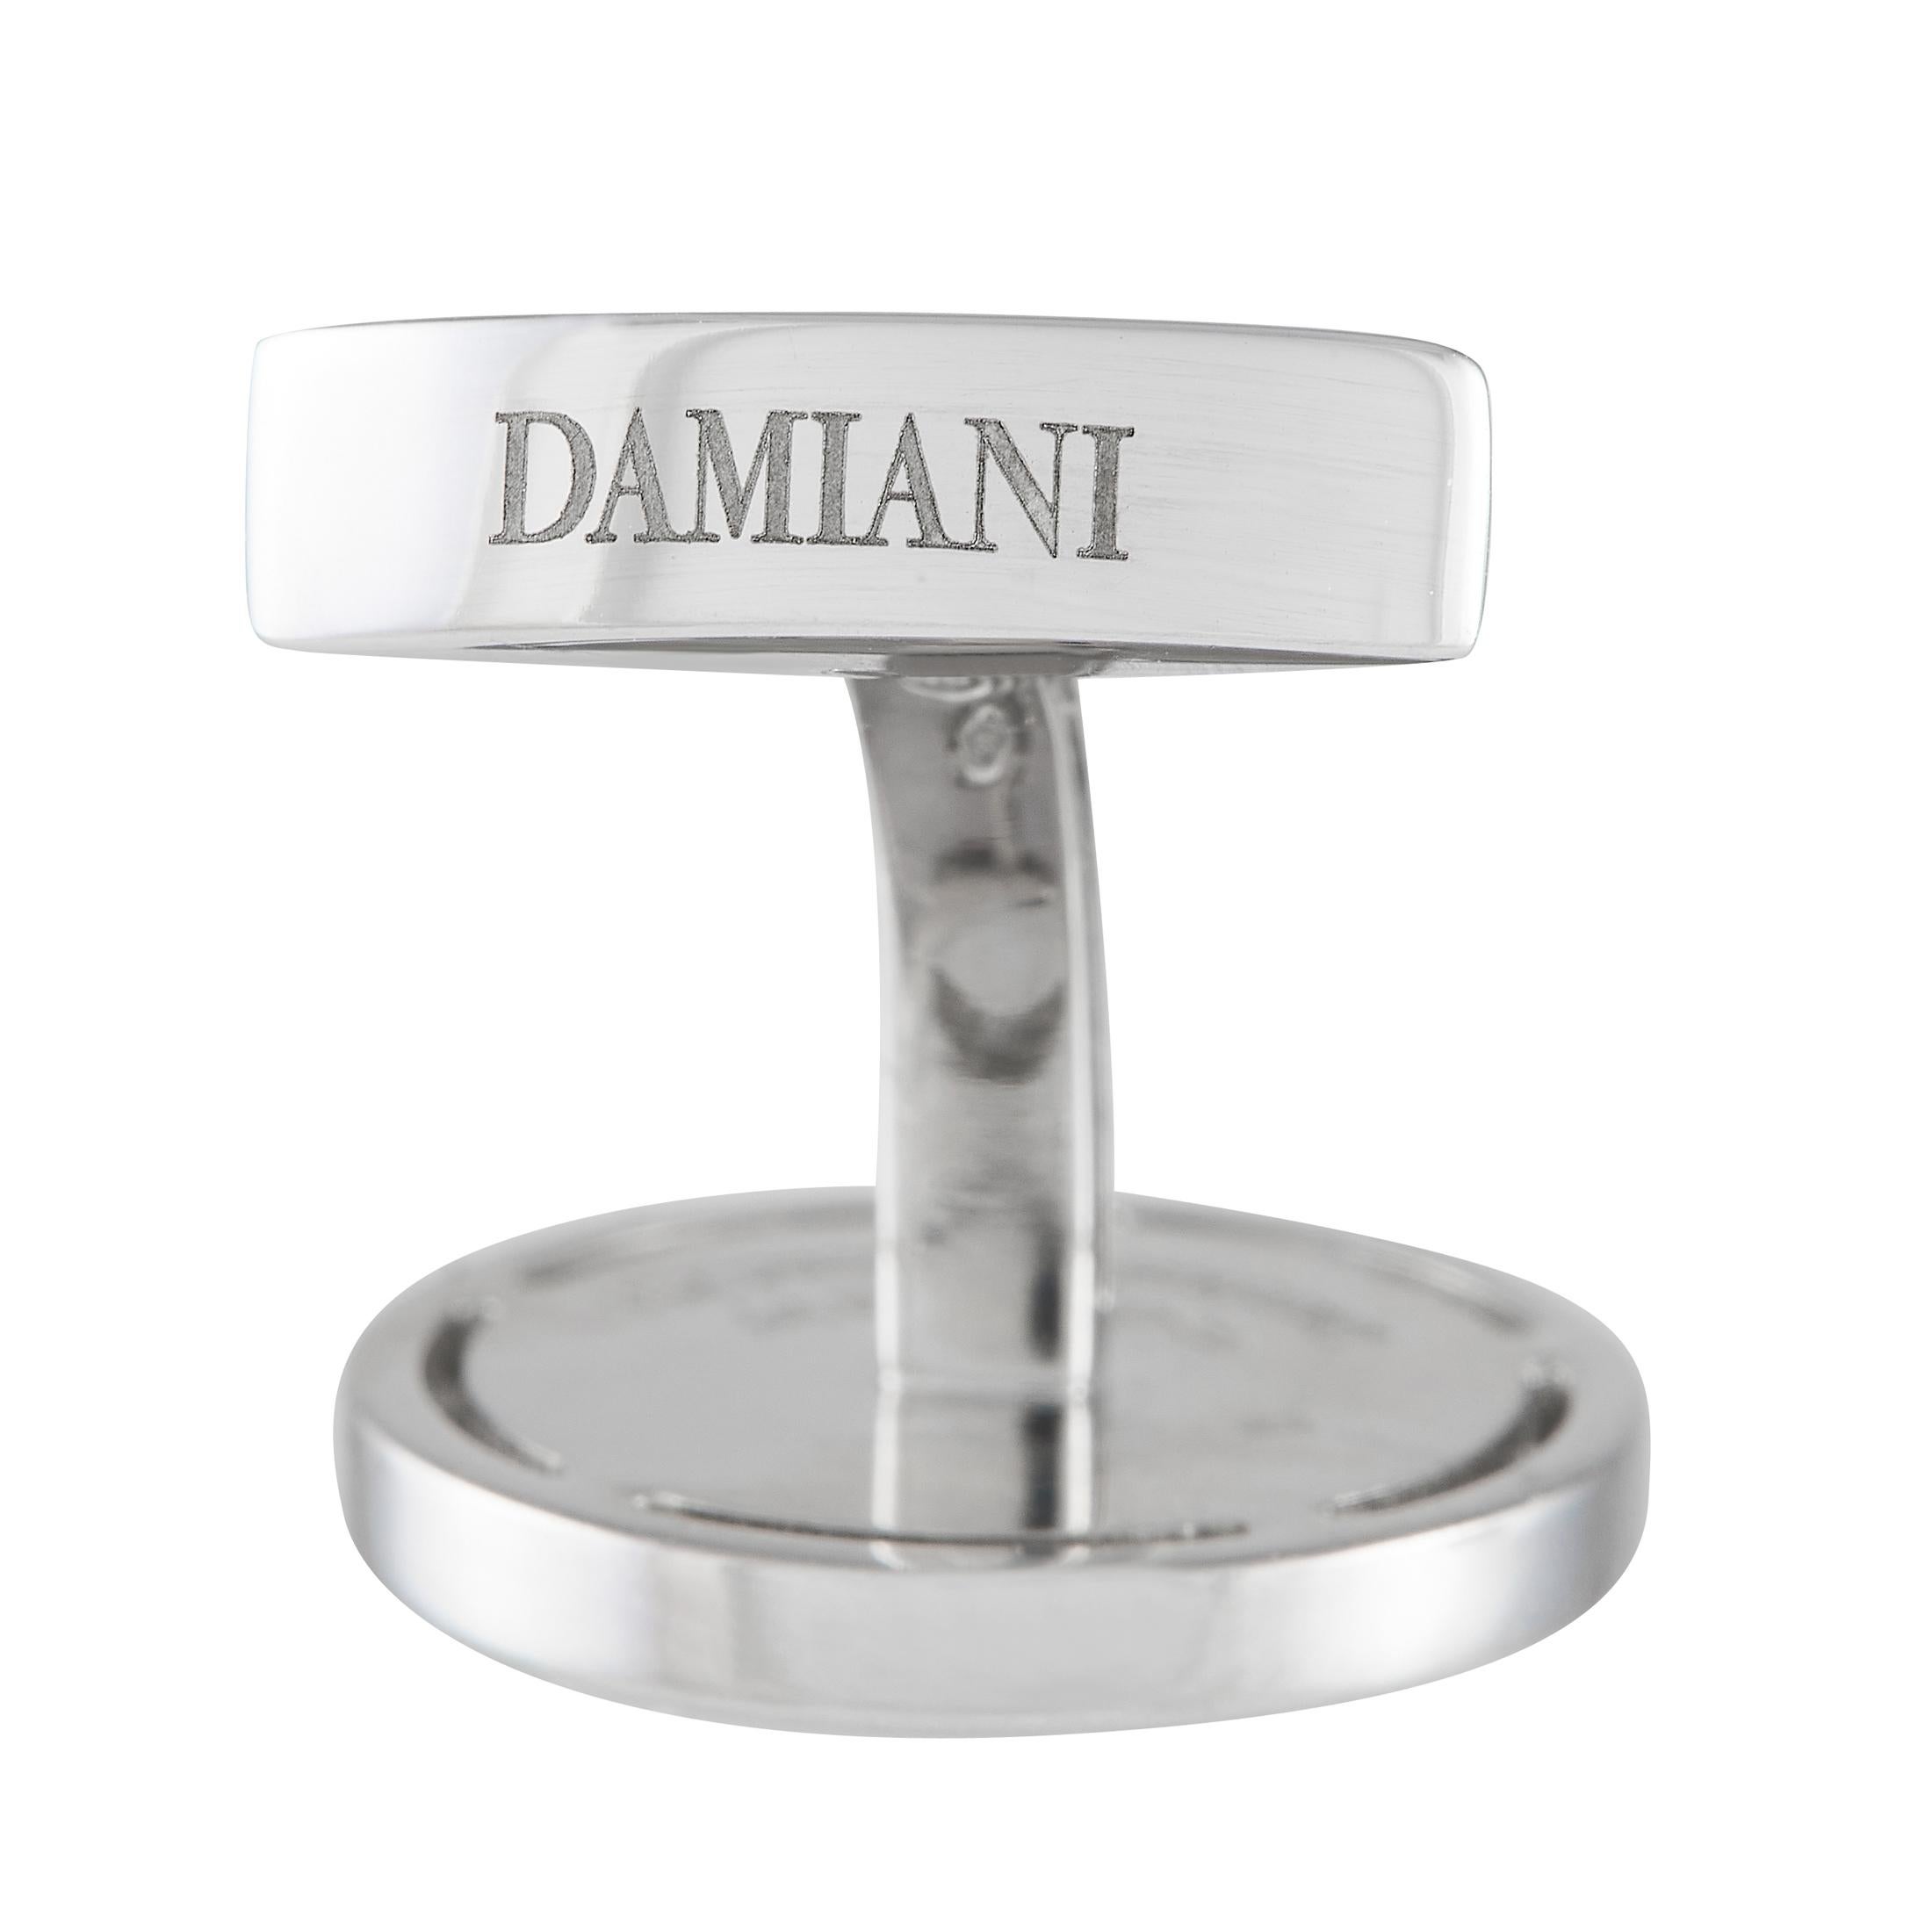 Damiani 18k White Gold Diamond and Onyx Cufflinks In Excellent Condition For Sale In Southampton, PA